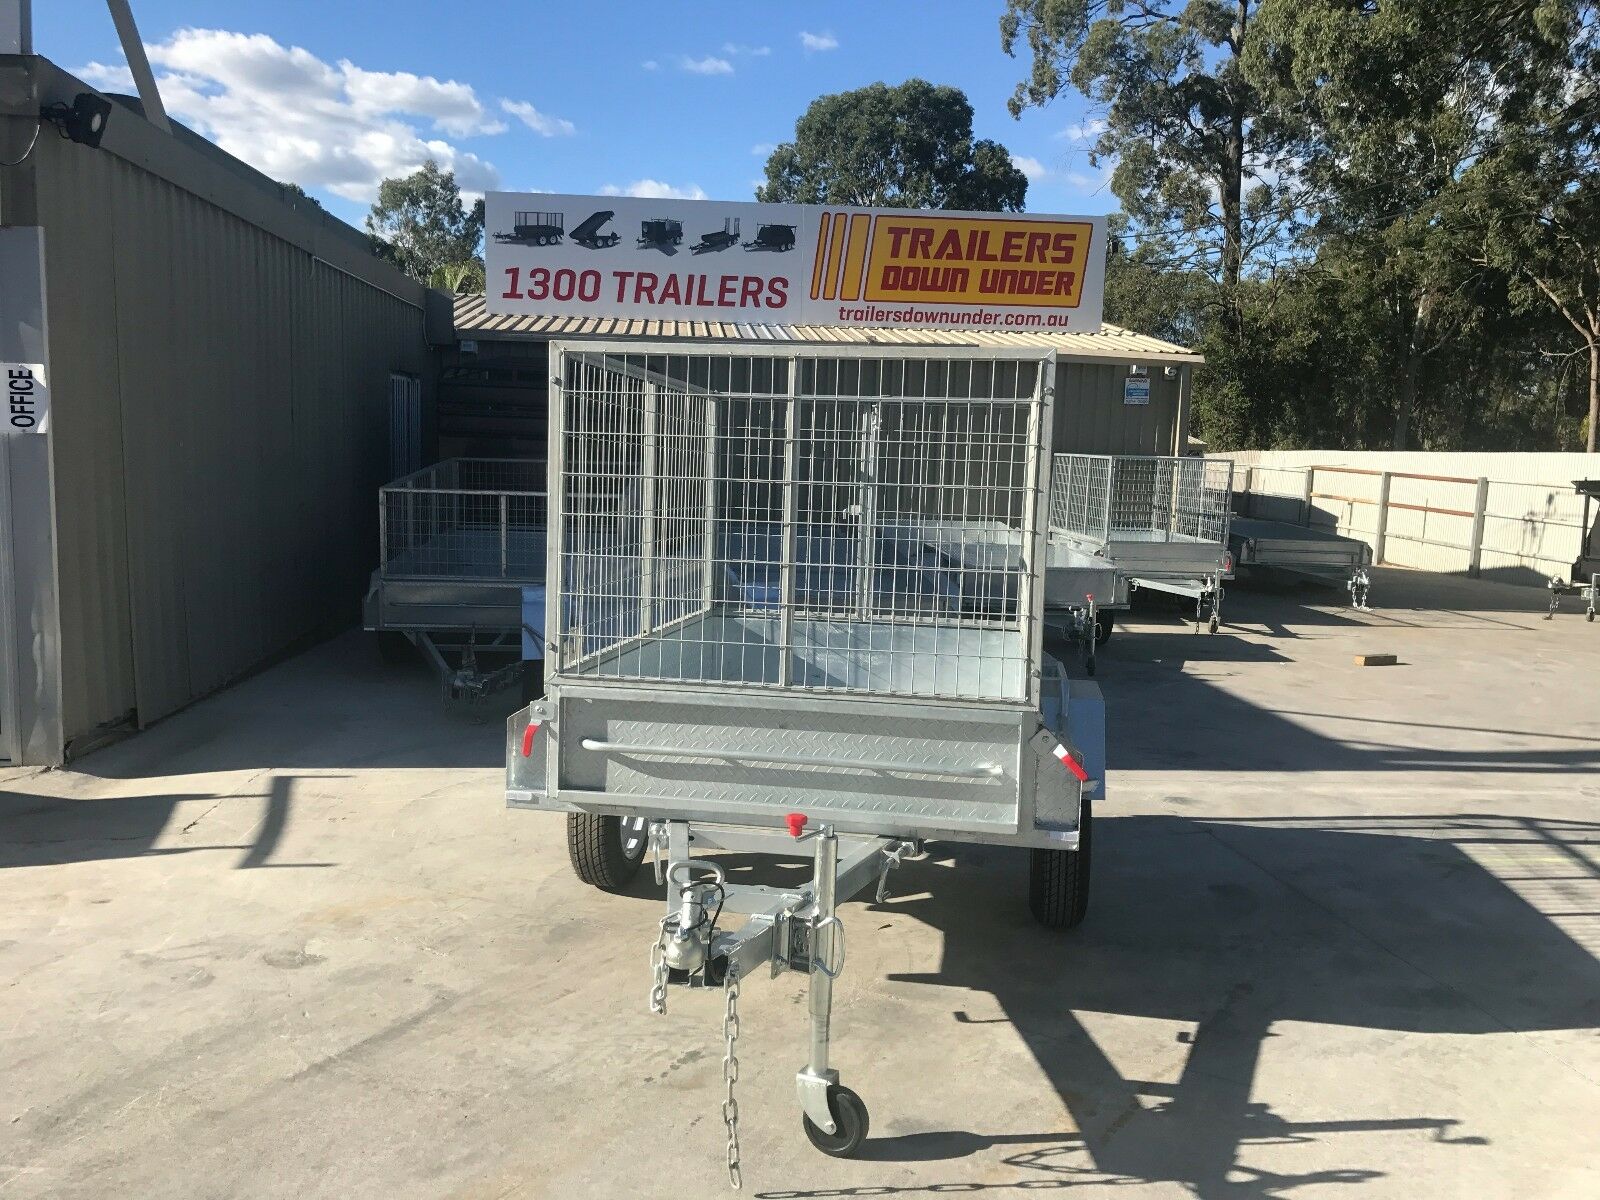 6×4 Galvanised Box Trailer with 3 Ft Cage for Sale in Brisbane<br><br><span class="galv-import">Imported Trailer</span>